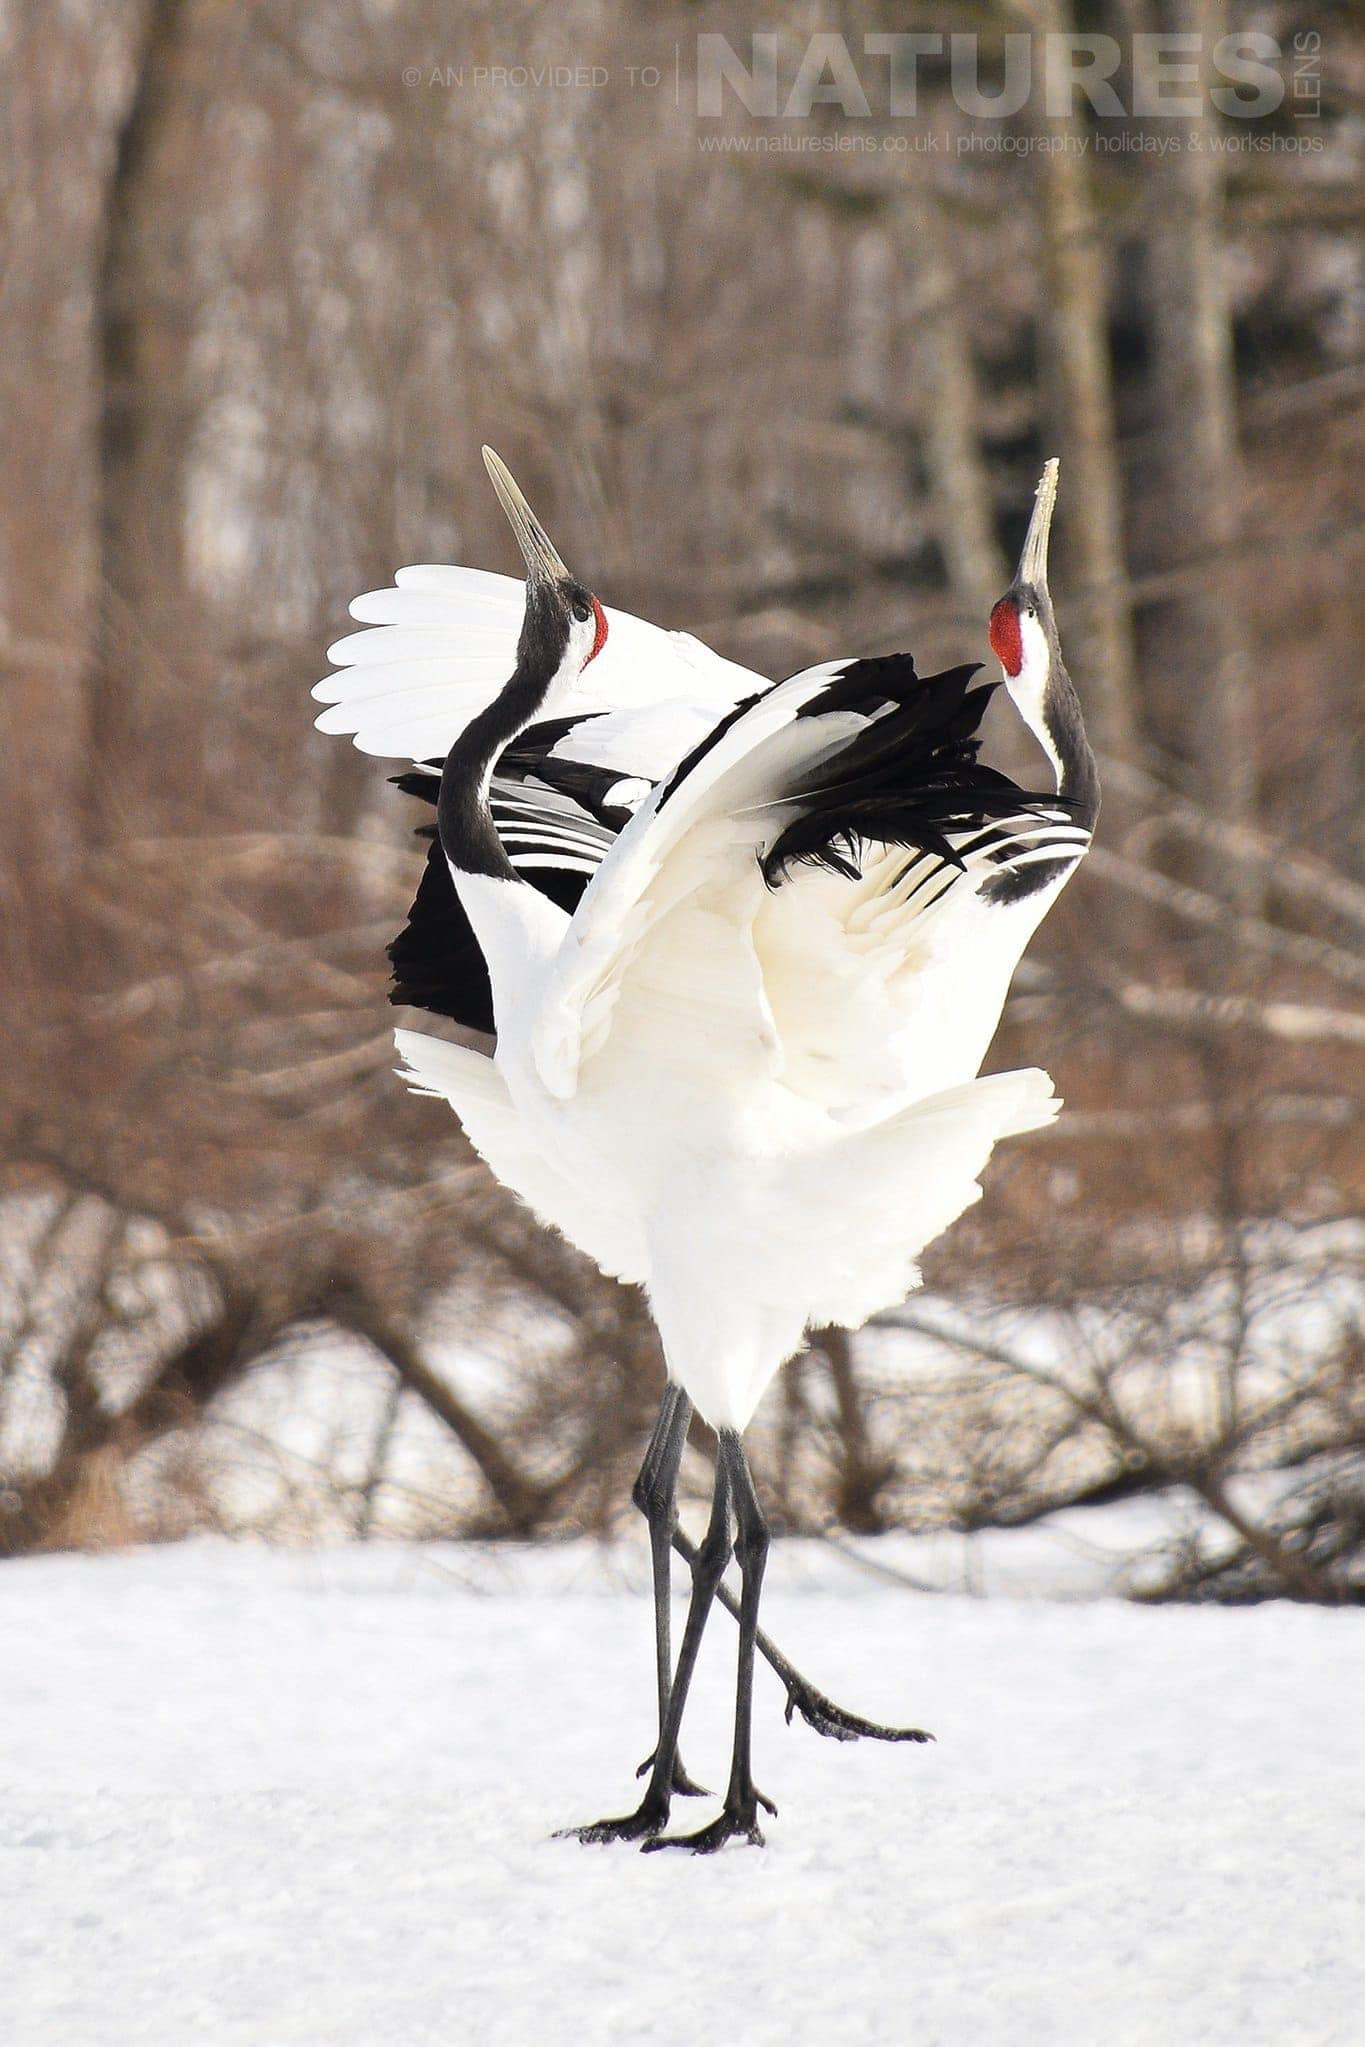 A Pair Of Beautiful Red Crowned Cranes Performing Their Dance In The Snow Captured Natureslens During The Winter Wildlife Of Japan Photography Holiday